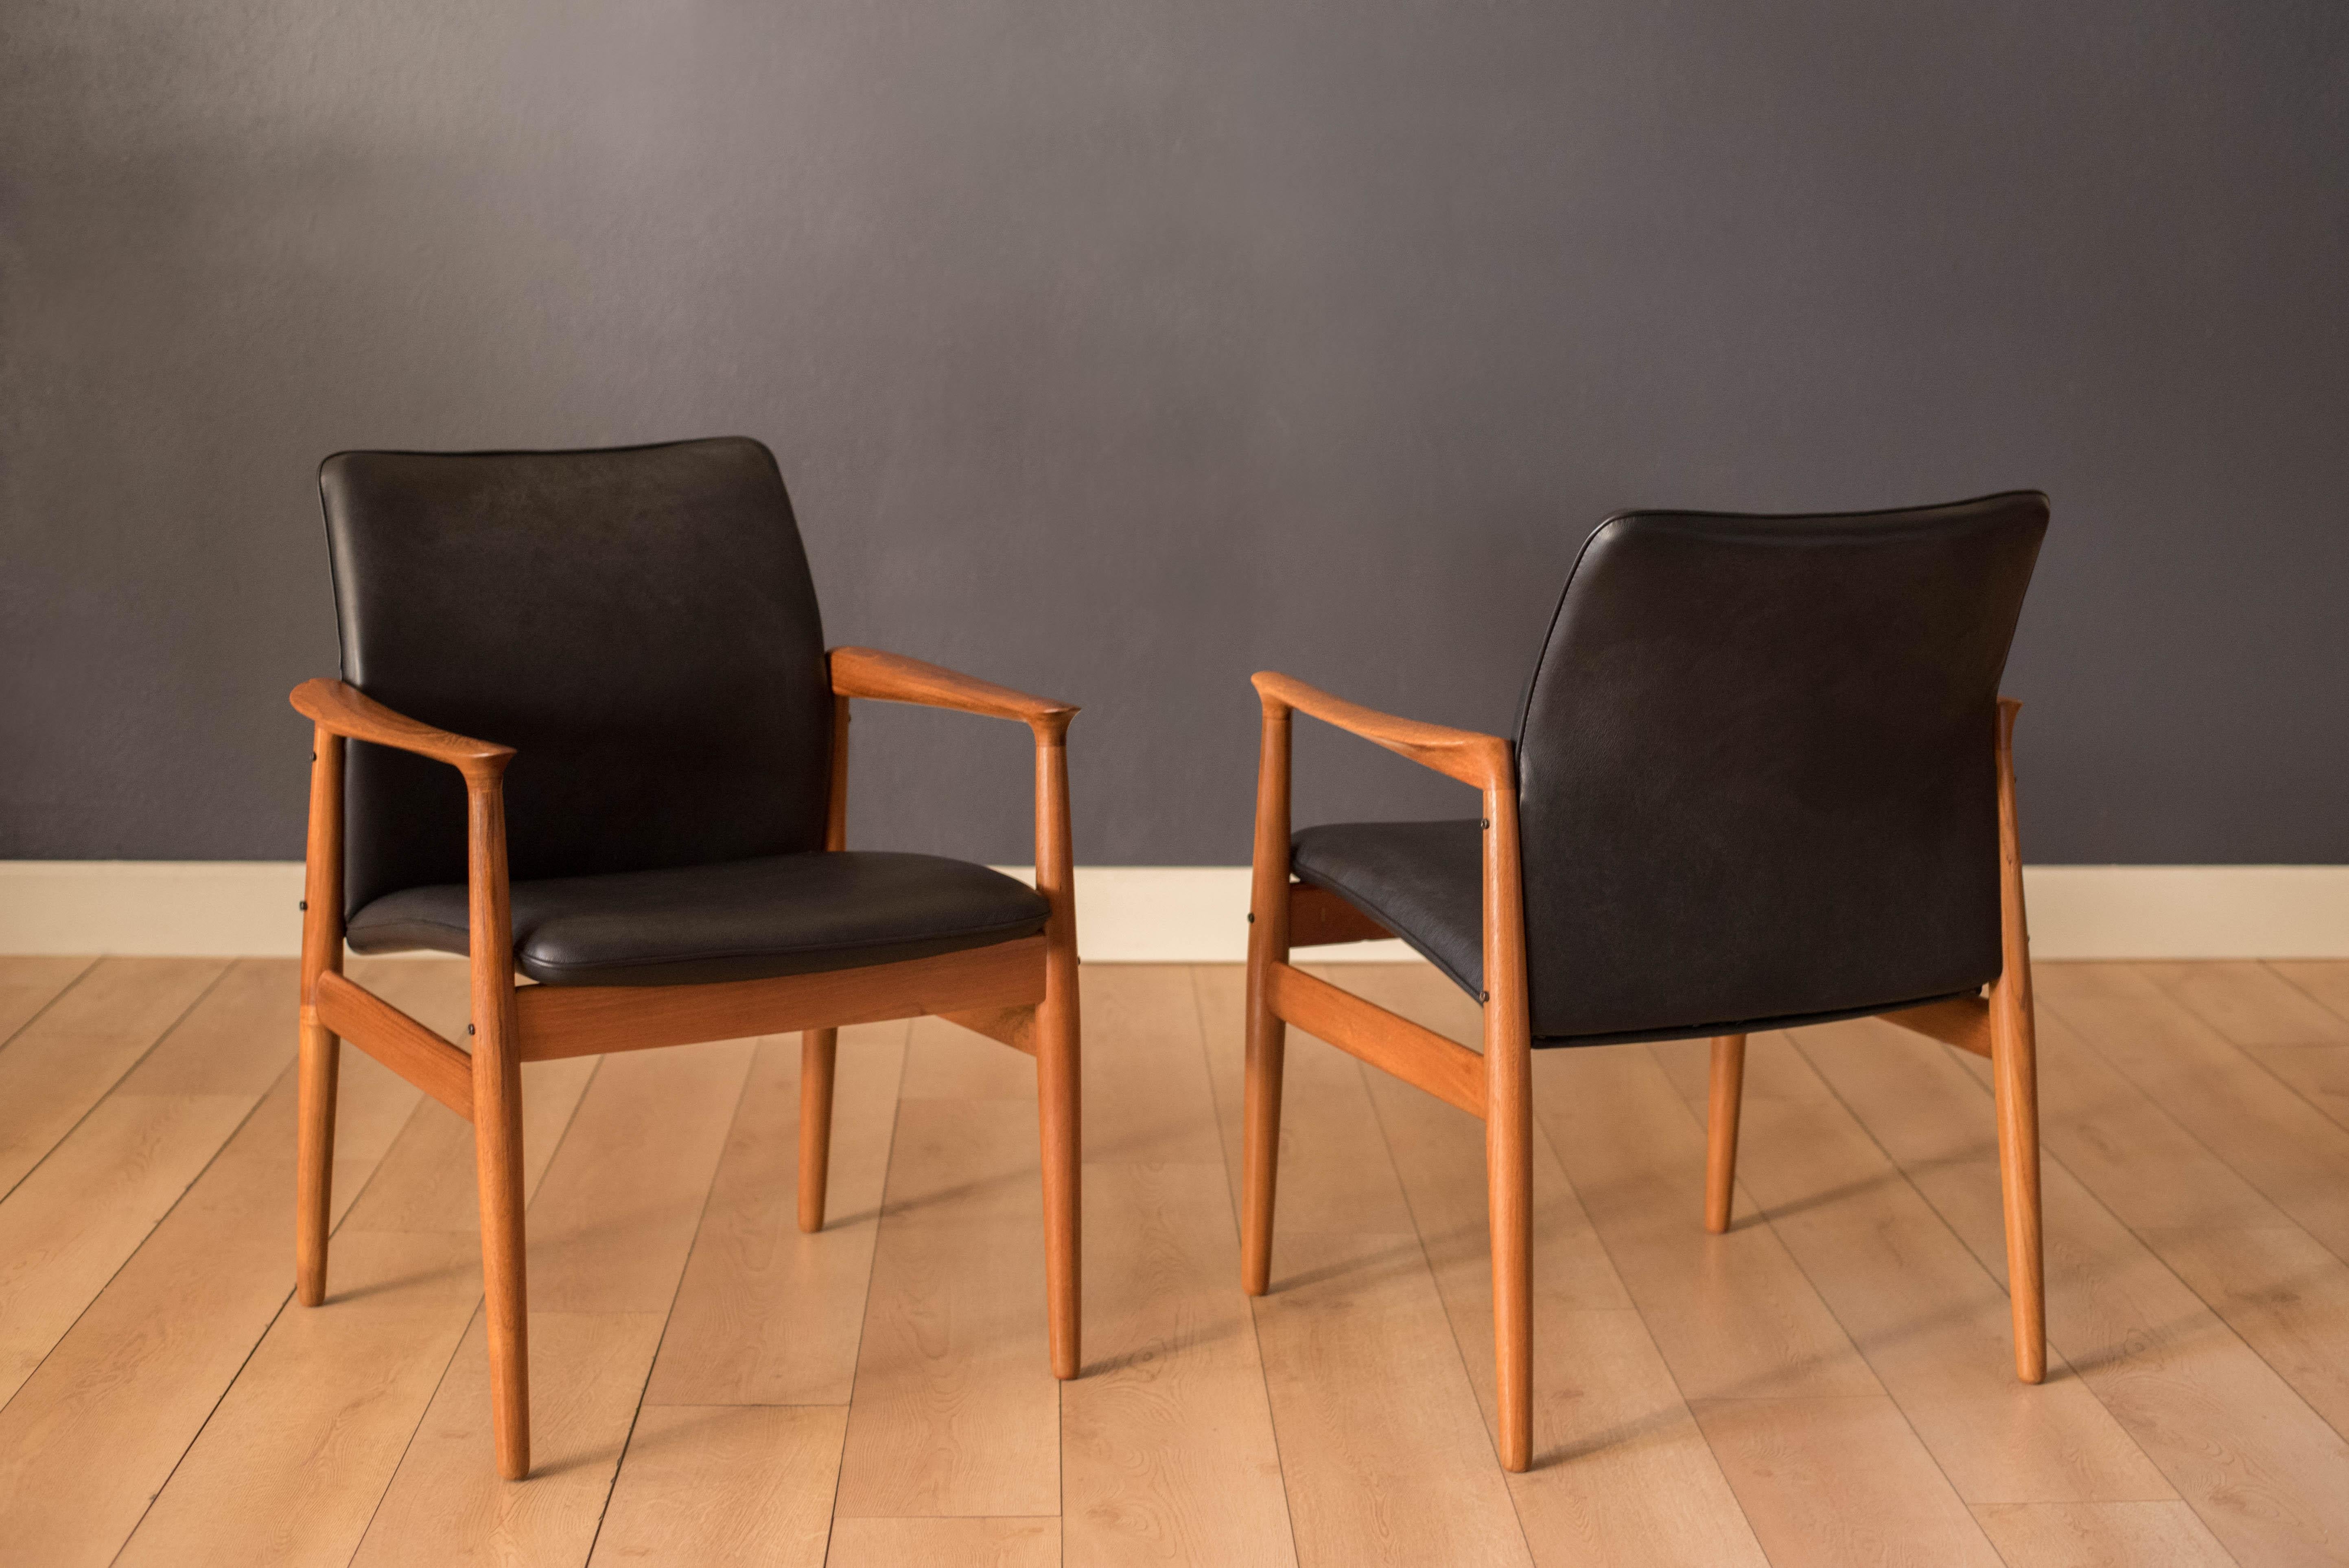 Pair of Vintage Danish Teak and Leather Armchairs by Grete Jalk for Glostrup For Sale 5